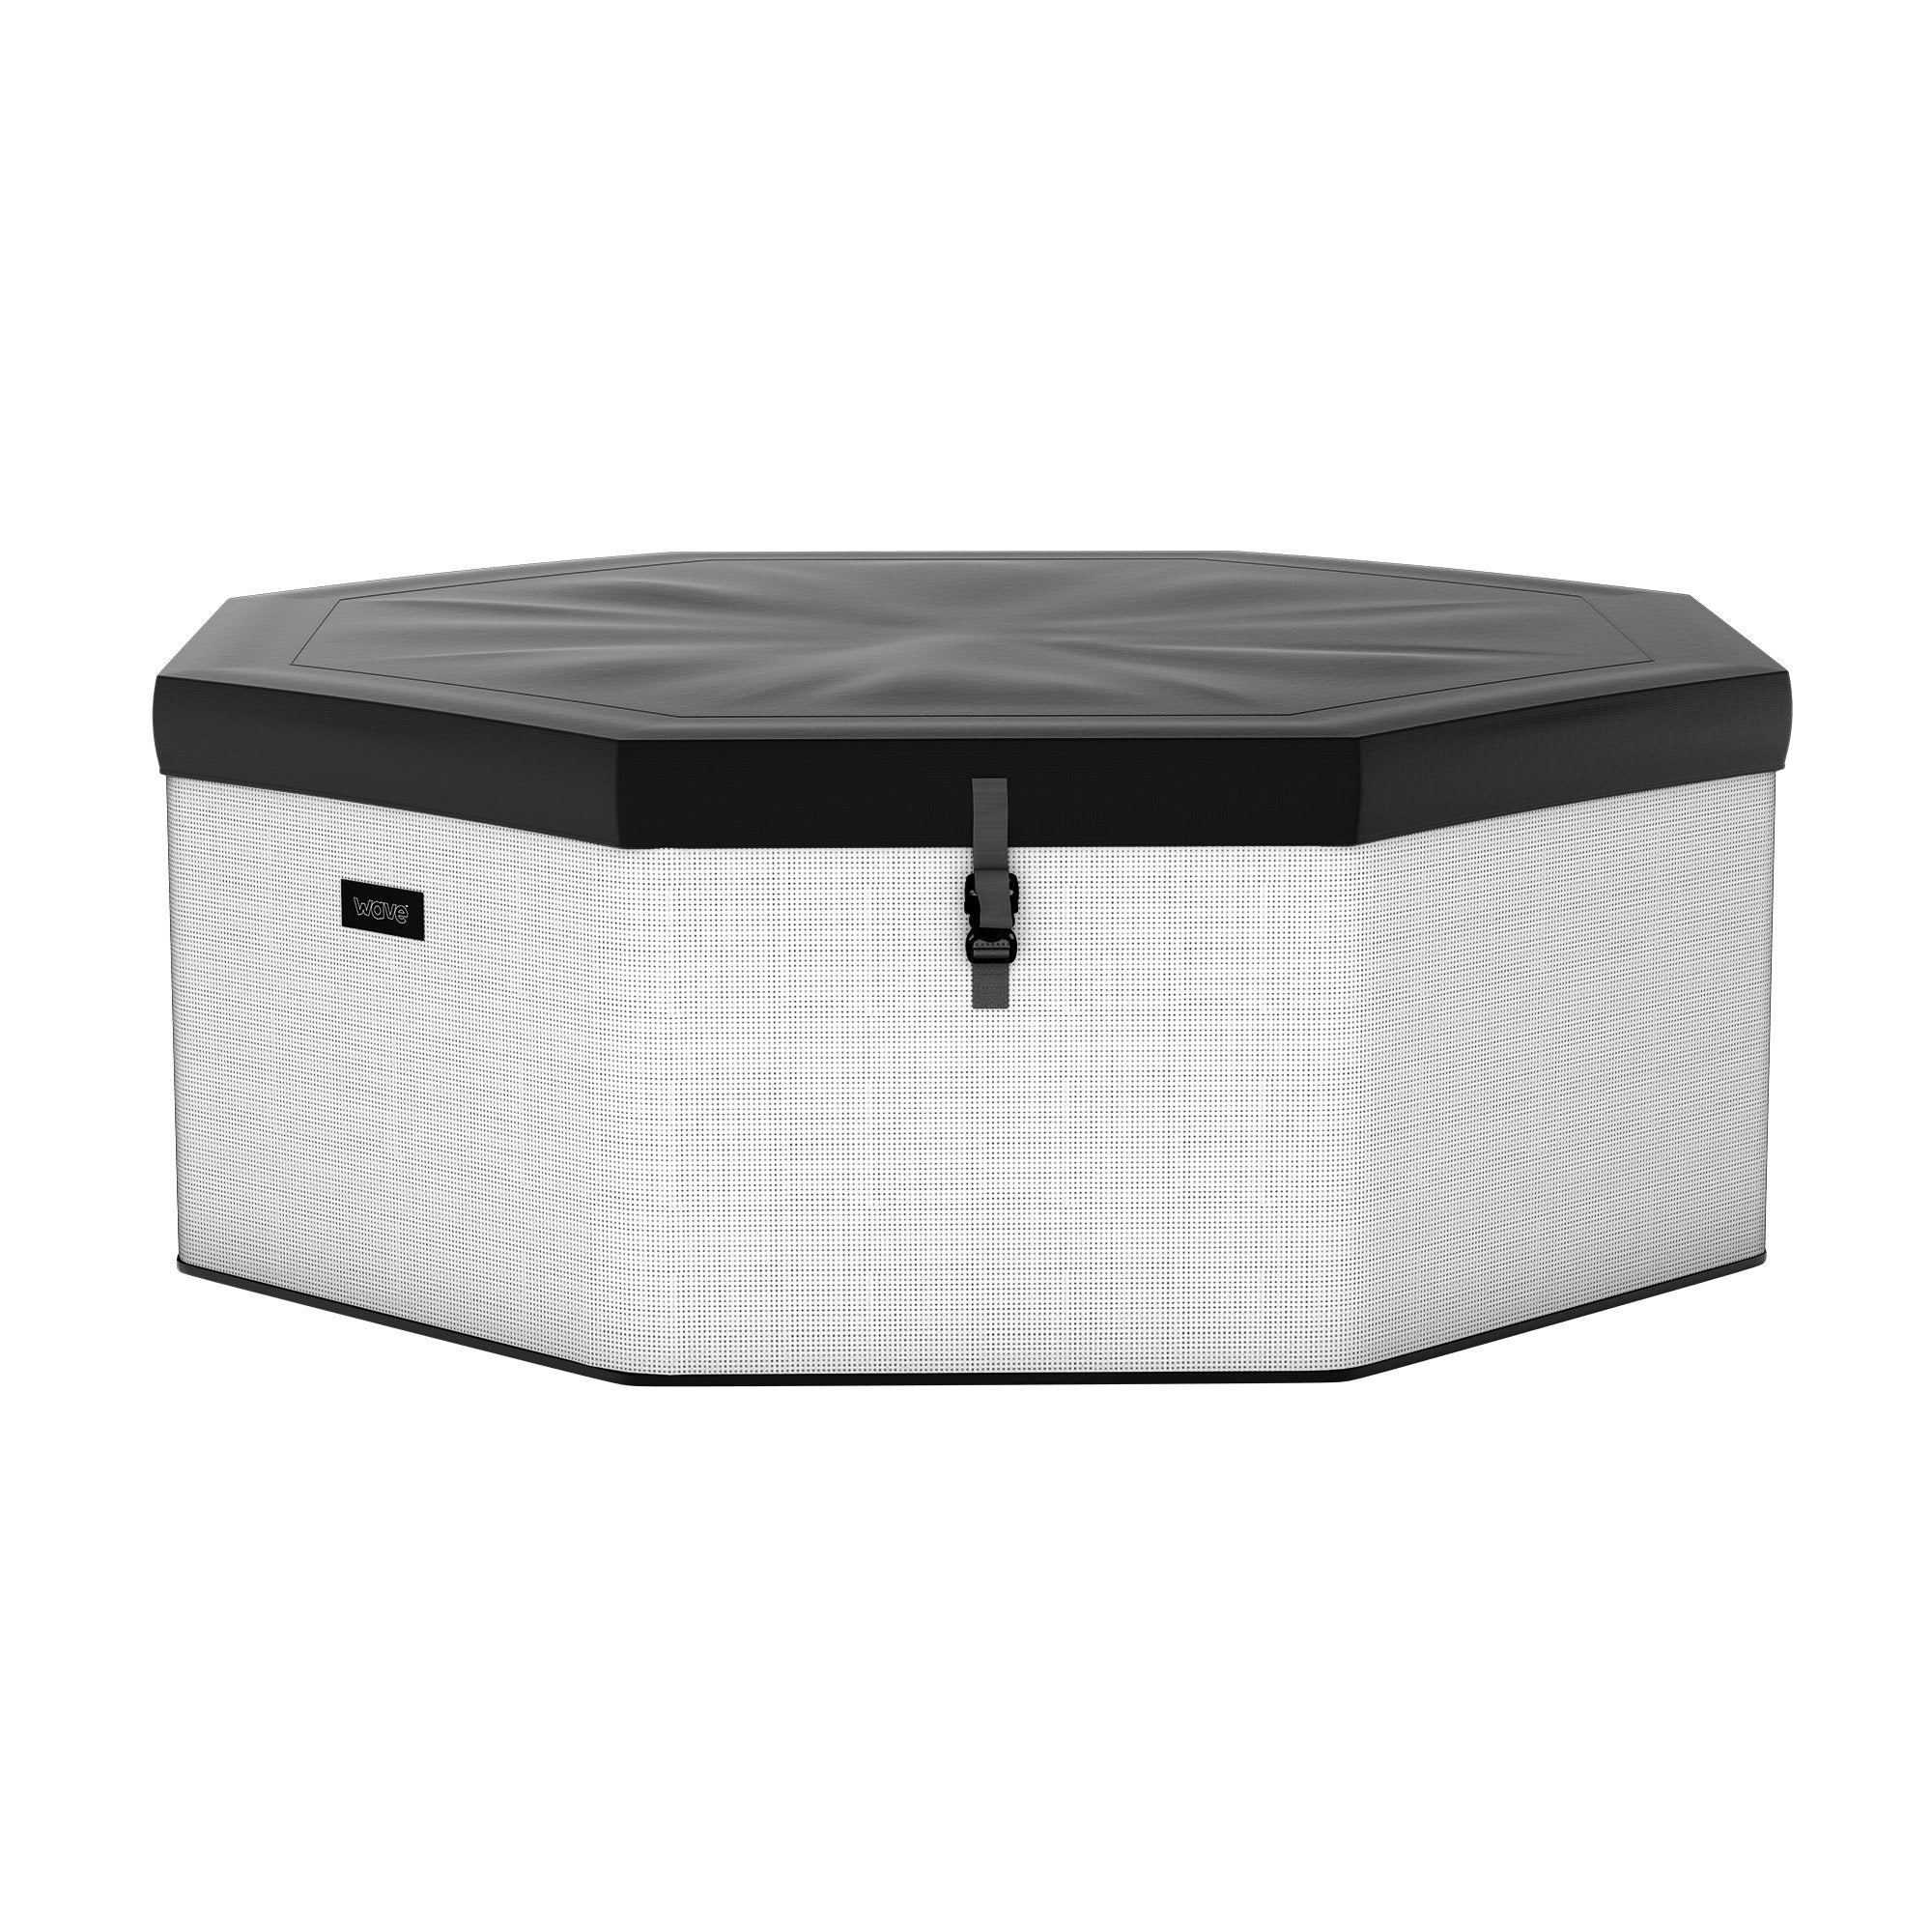 Como v2 | 6-Person Eco Foam Hot Tub | Integrated Heater | Pebble White - Wave Spas Inflatable, foam Hot Tubs